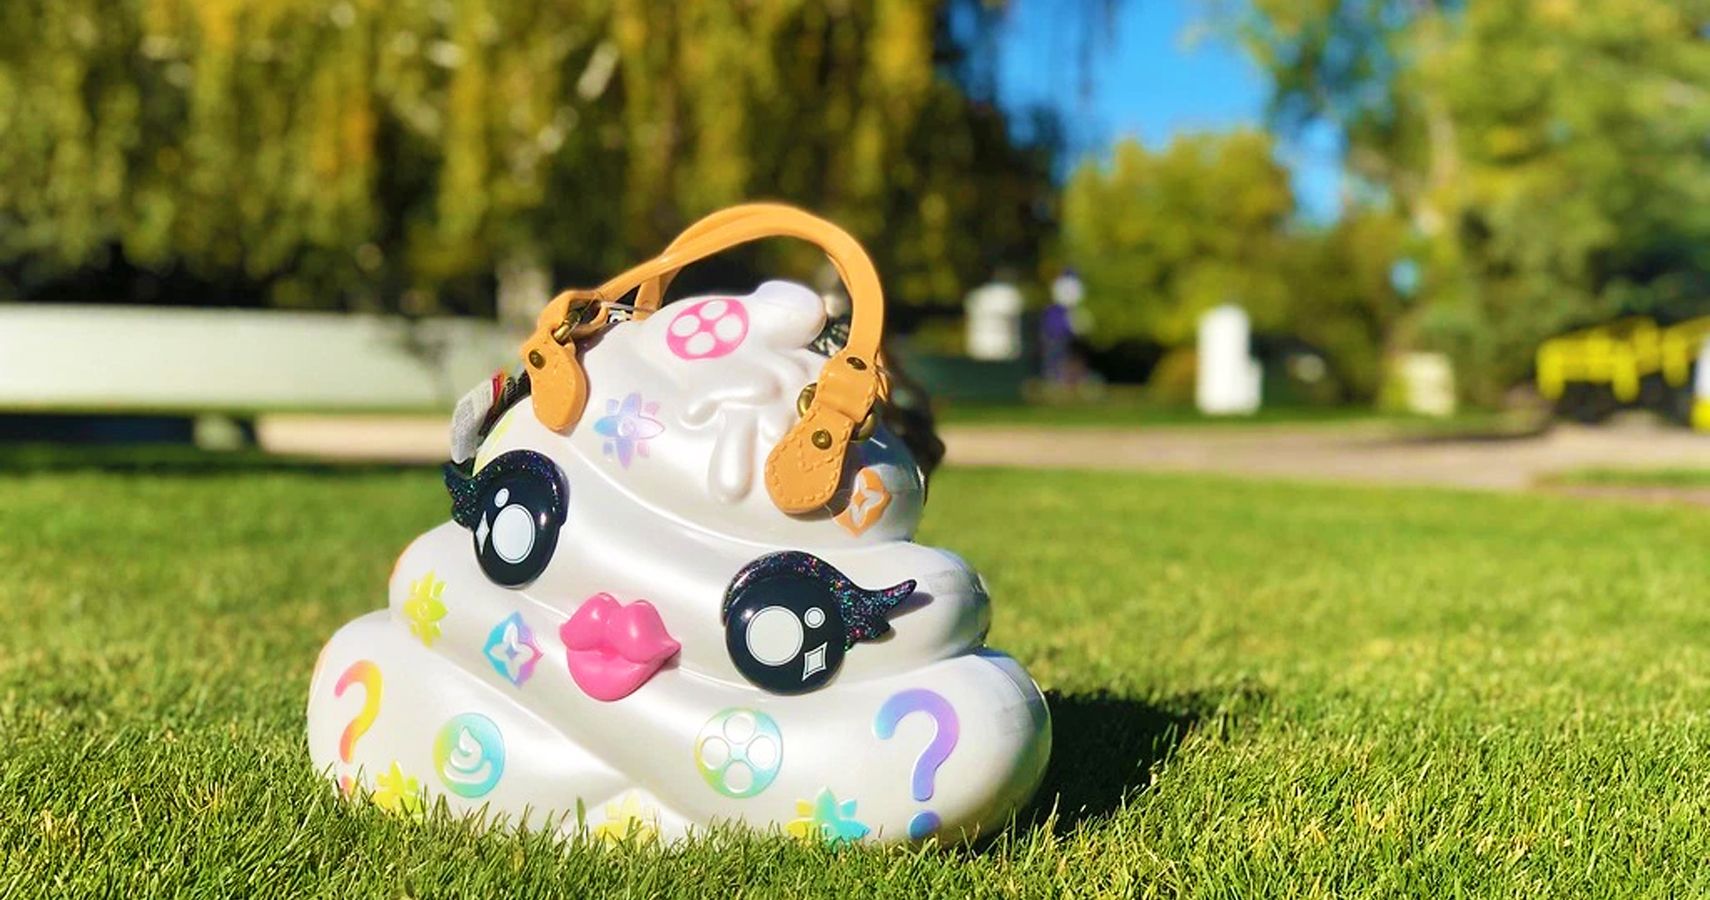 The 20 Worst Kids Toys Of 2018 (And The 10 Best)